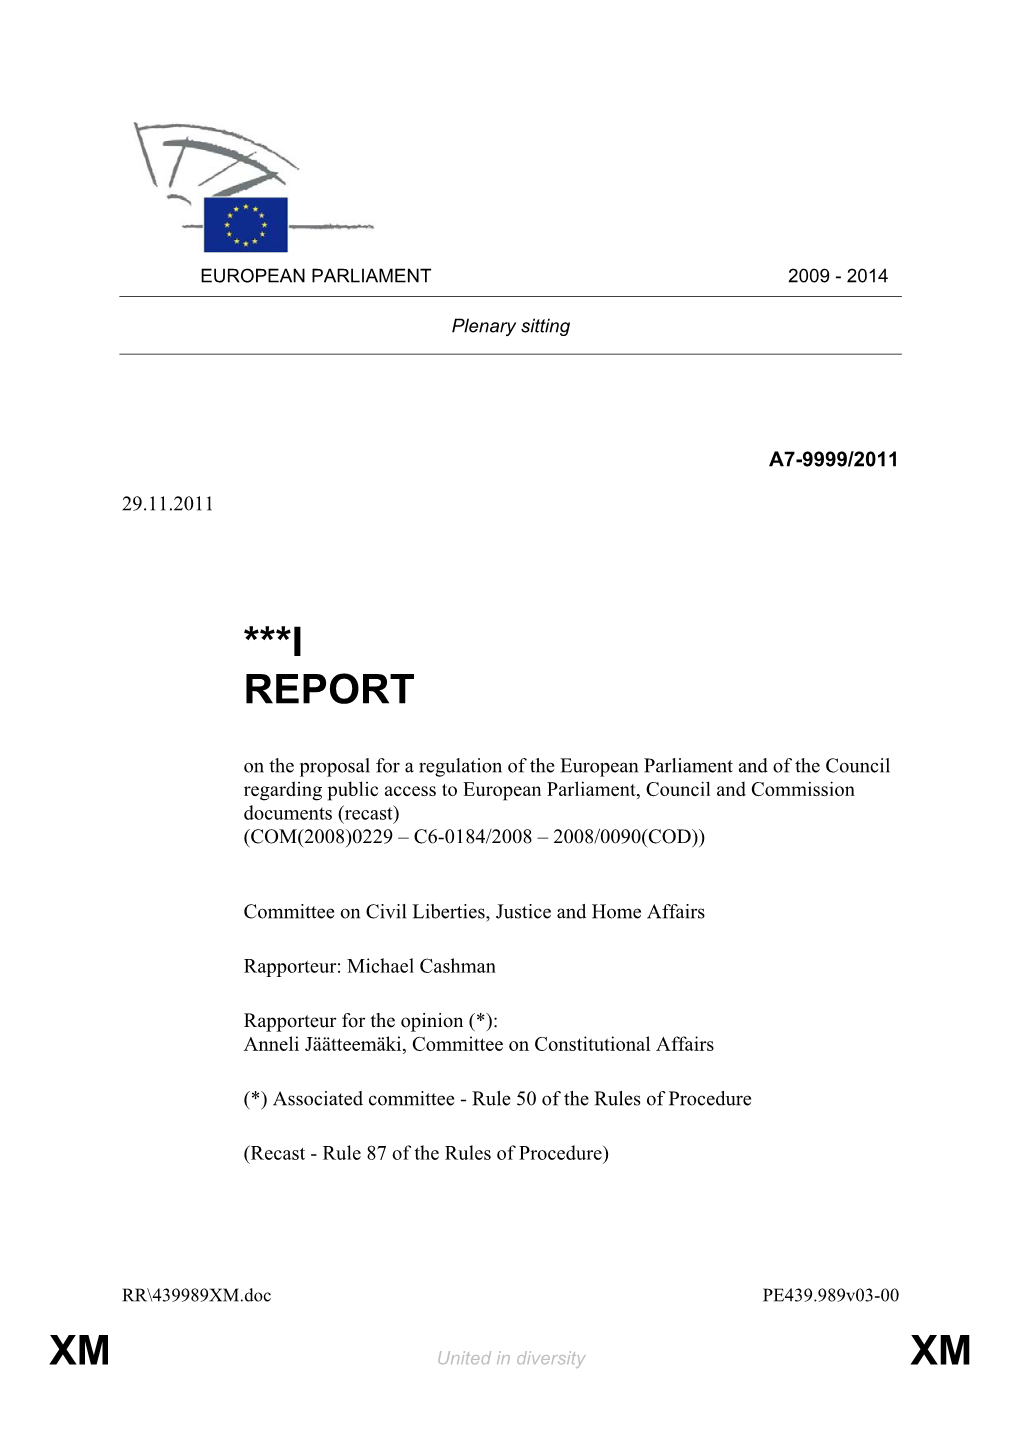 Report on the Proposal for a Regulation Regarding Public Access to European Parliament, Council and Commission